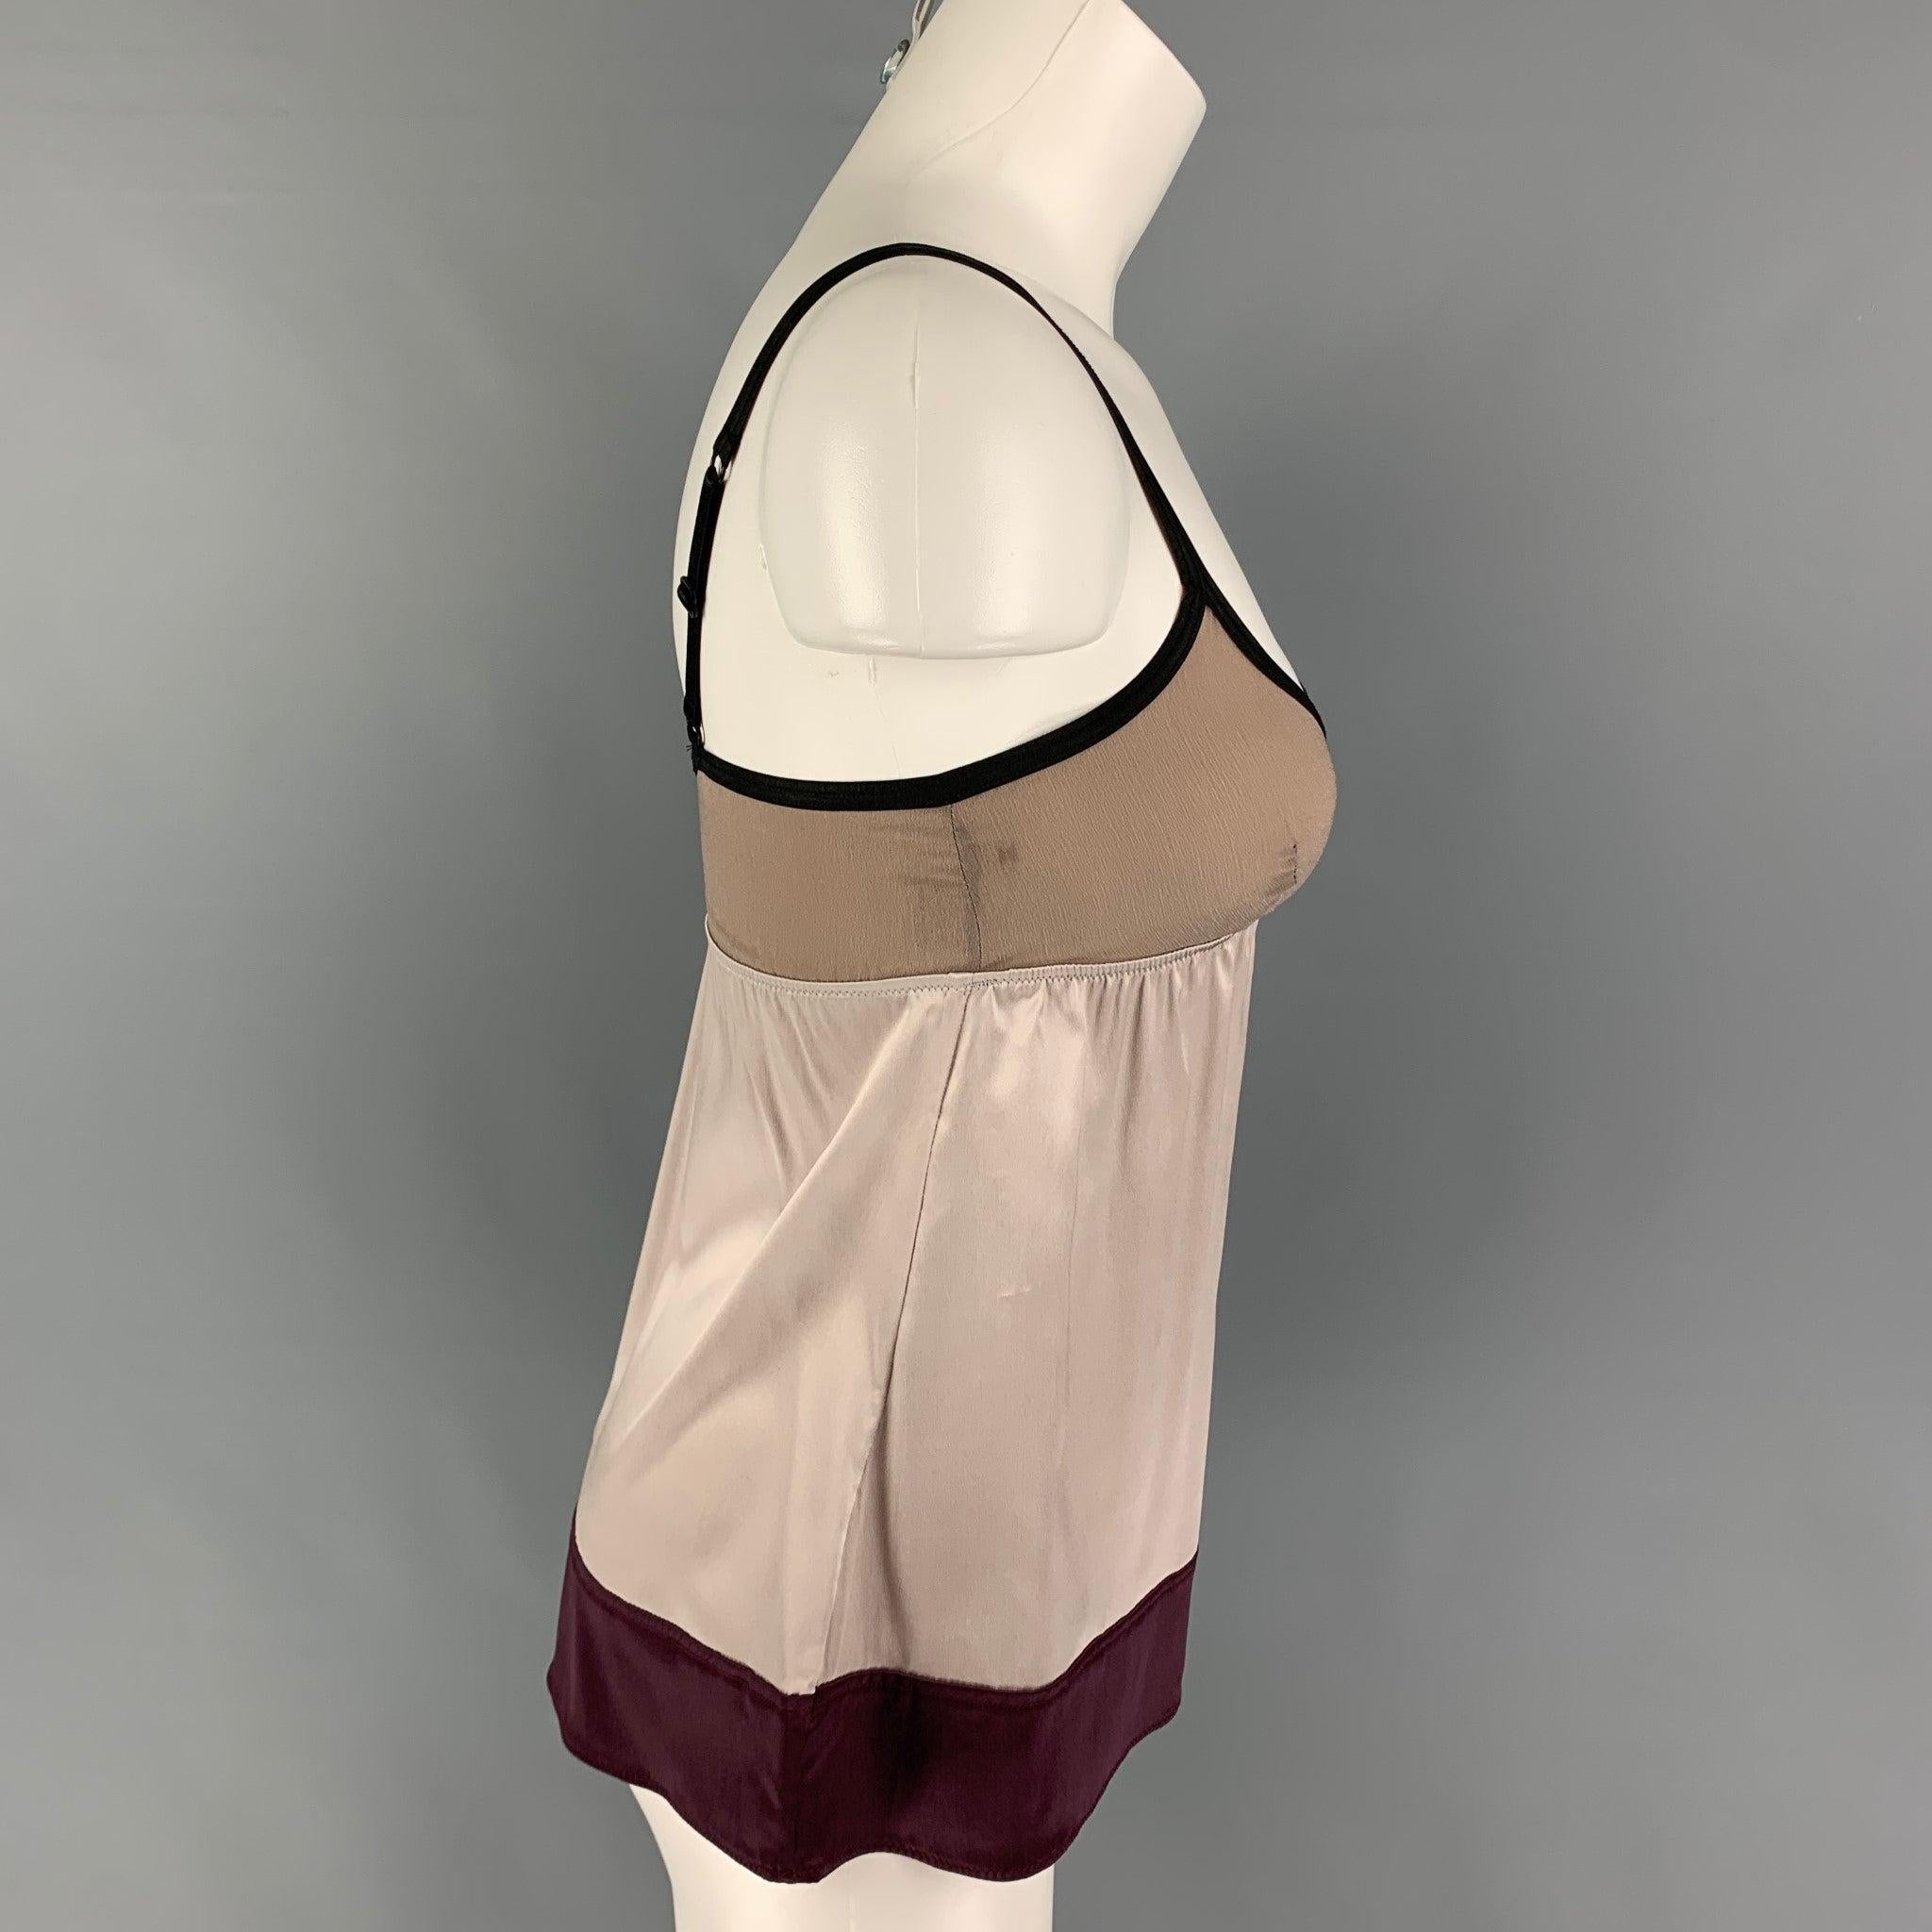 MARNI top comes in a silver & purple color block silk featuring spaghetti straps.
Very Good
Pre-Owned Condition. 

Marked:   II 

Measurements: 
  Bust: 26 inches  Length: 15.5 inches 
  
  
 
Reference: 120010
Category: Dress Top
More Details
   